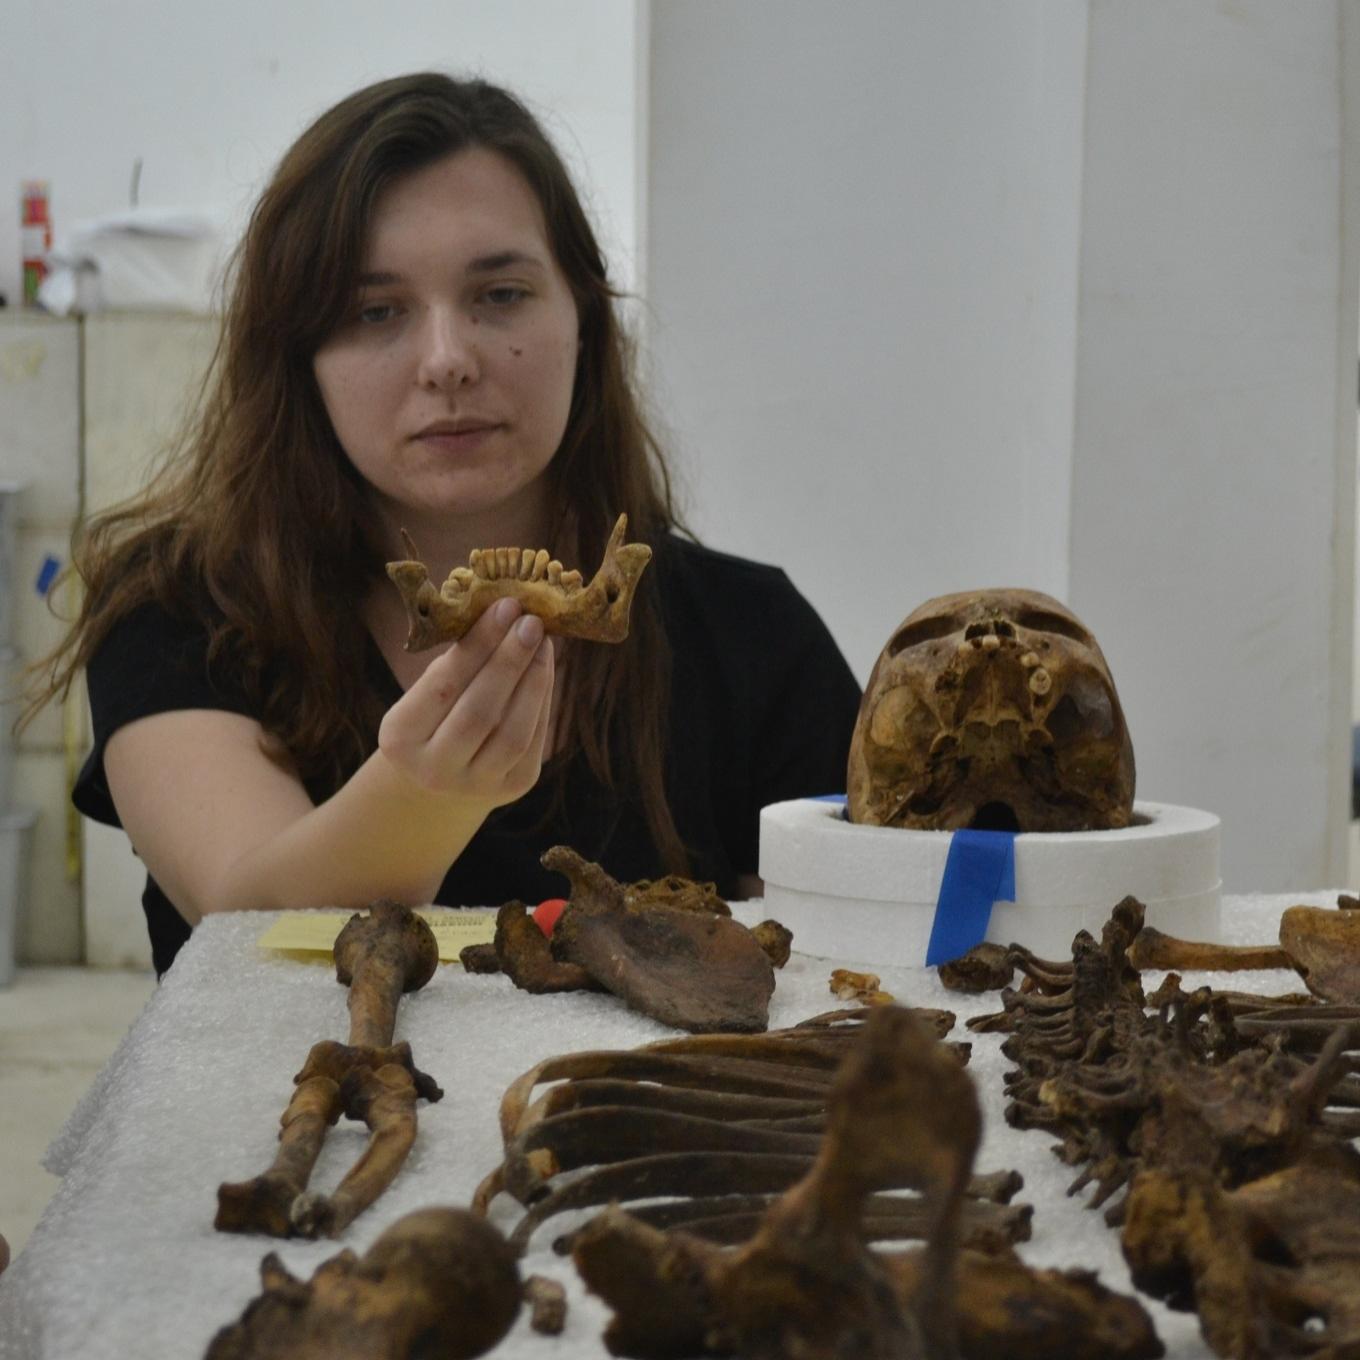 A forensics student examining a skeleton's remains